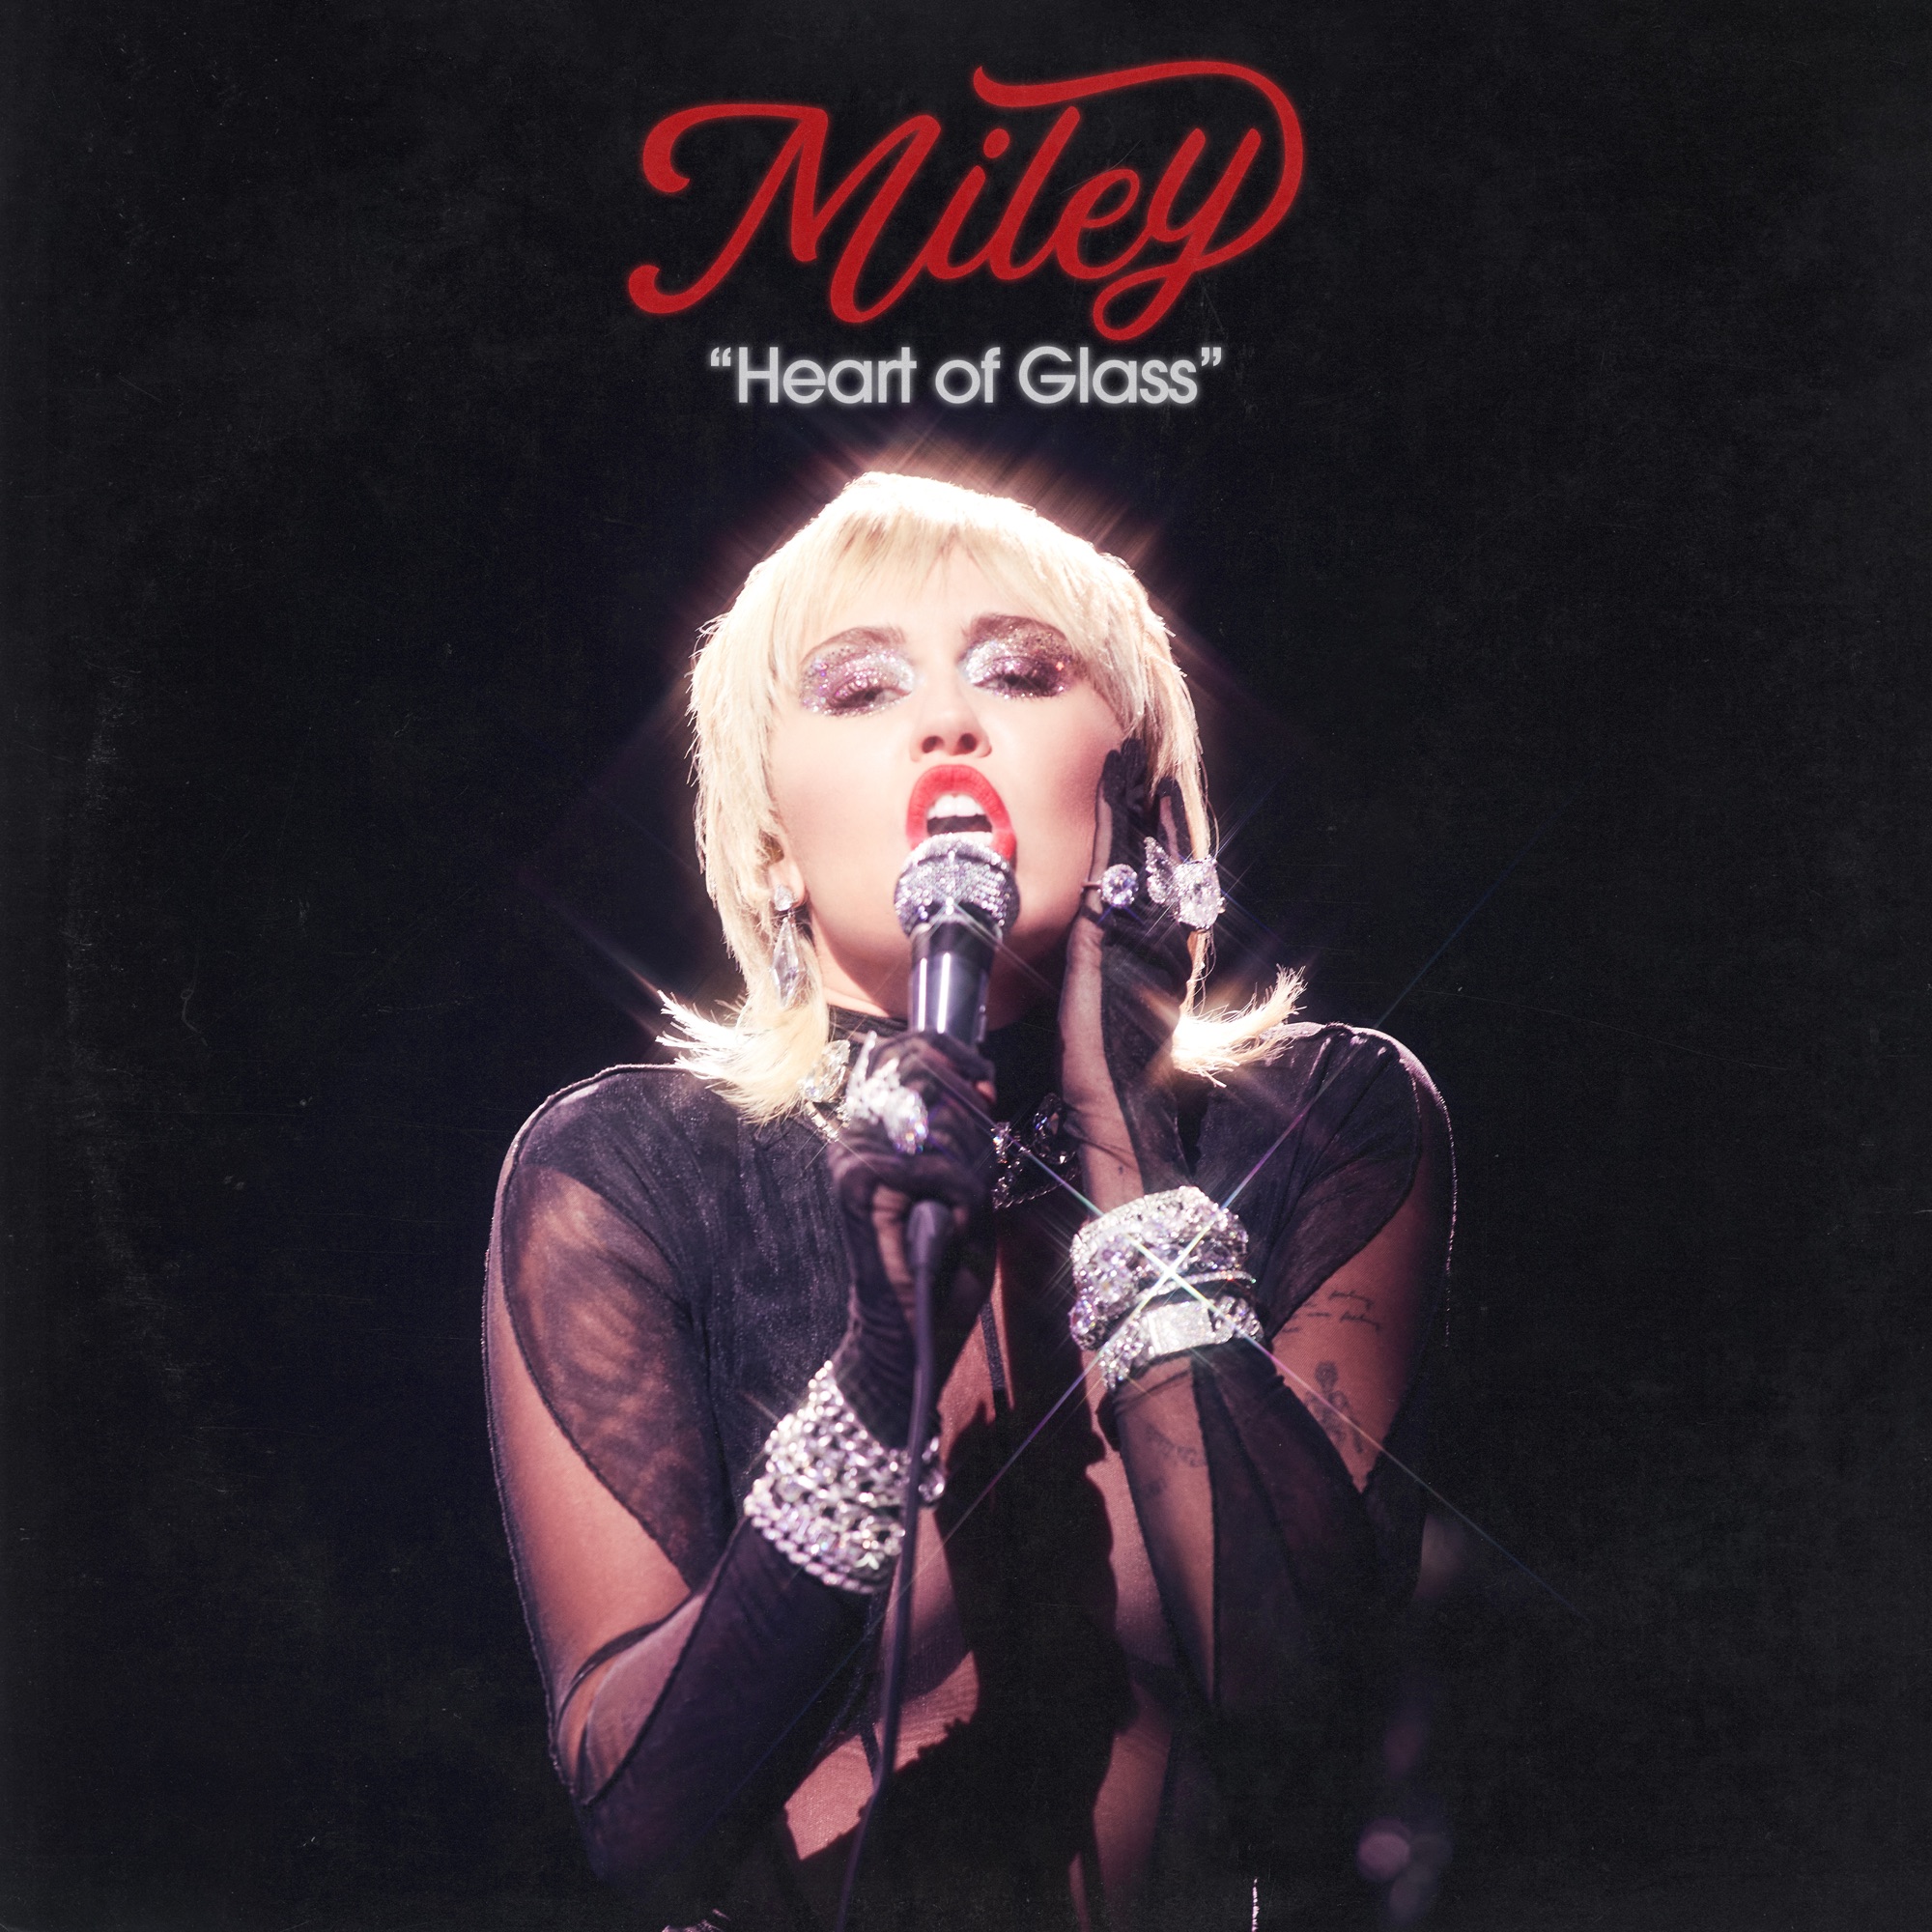 Miley Cyrus - Heart of Glass (Live from the iHeart Music Festival) - Single